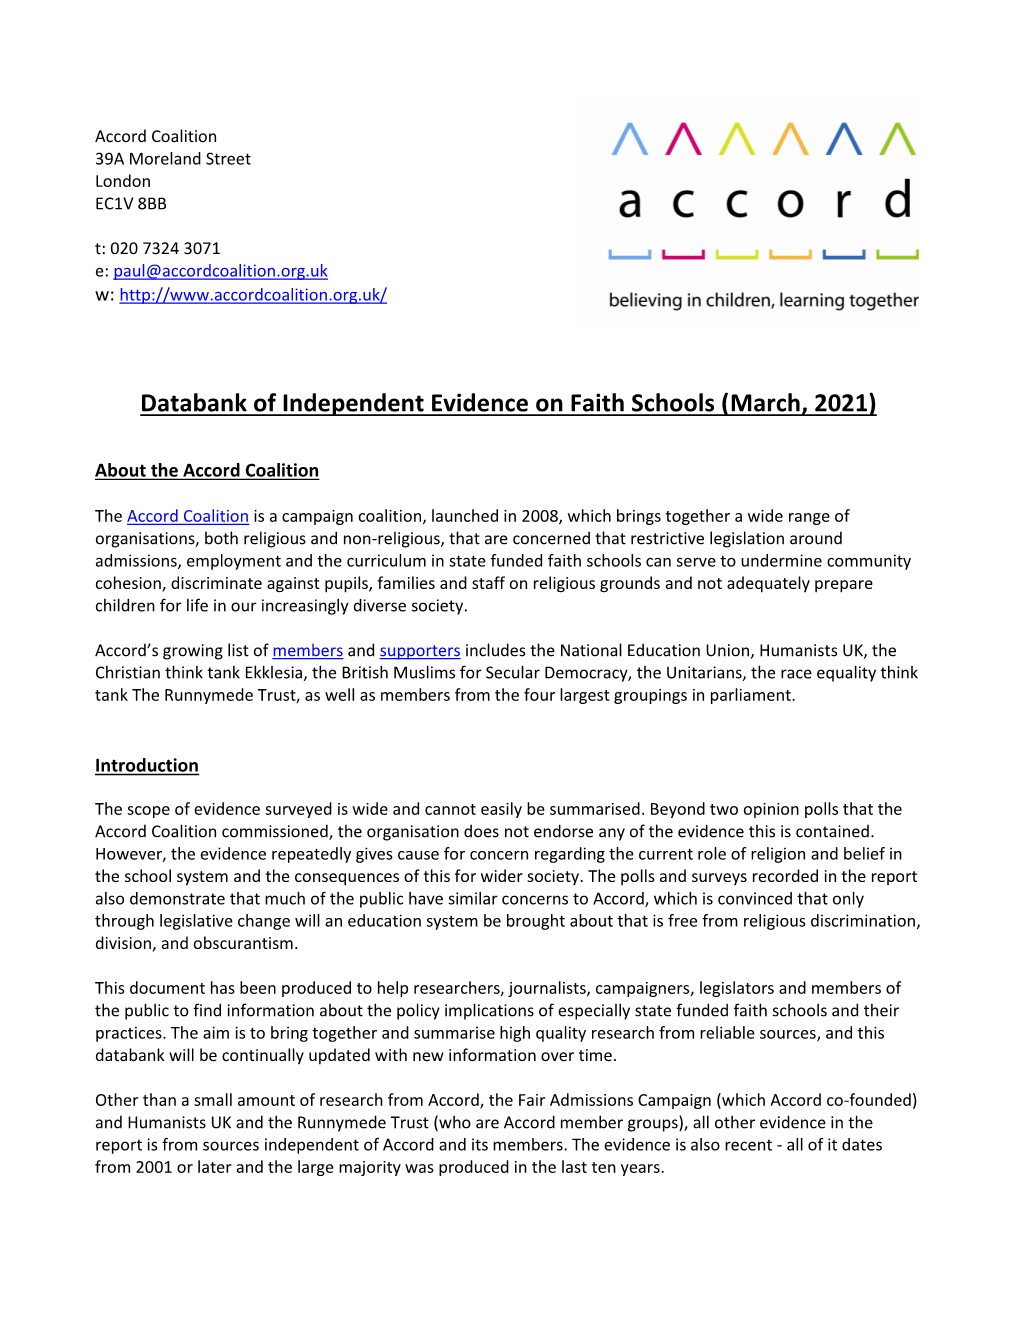 Databank of Independent Evidence on Faith Schools (March, 2021)